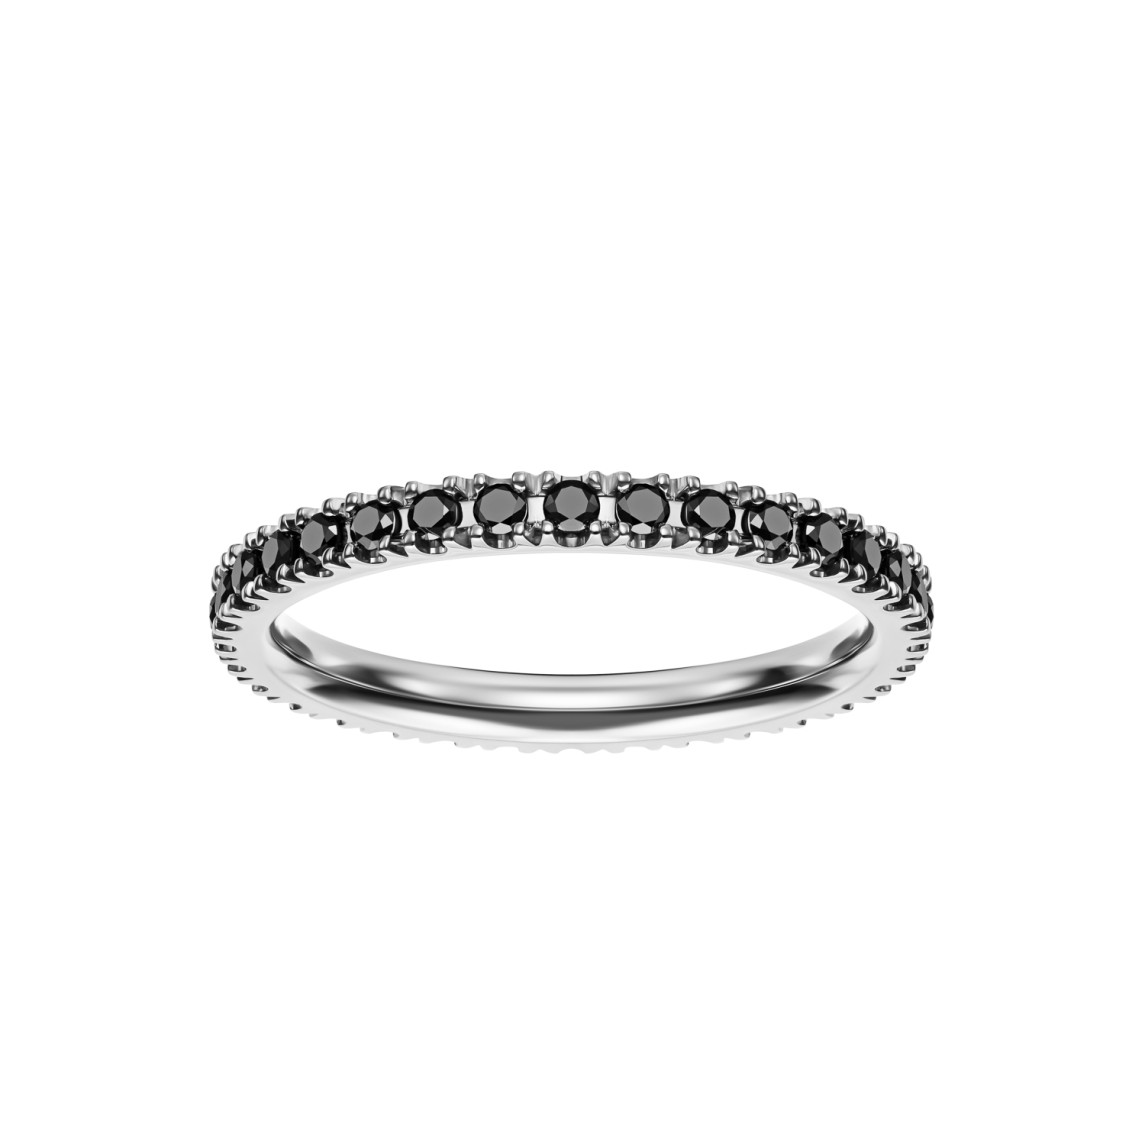 White Gold Ring With Black Diamonds